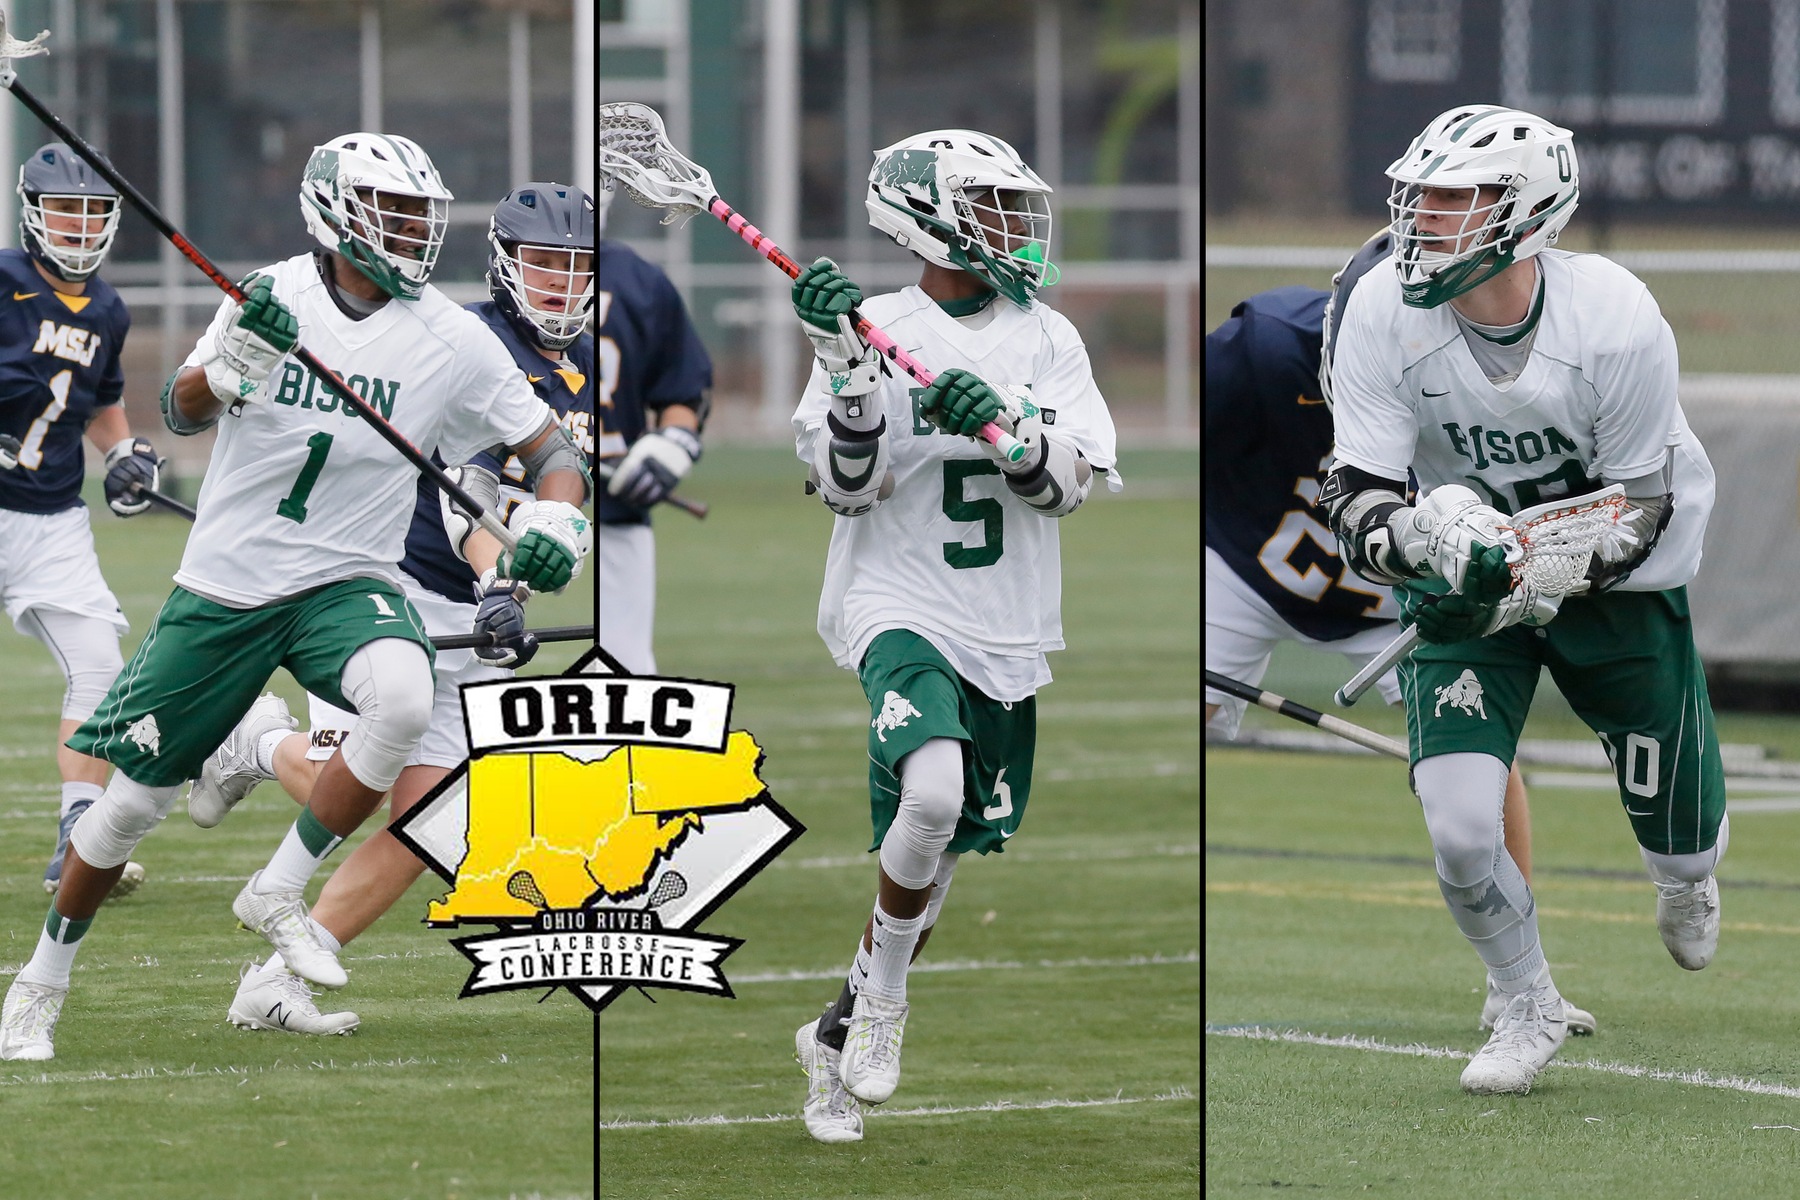 Men's lacrosse places six on All-ORLC teams